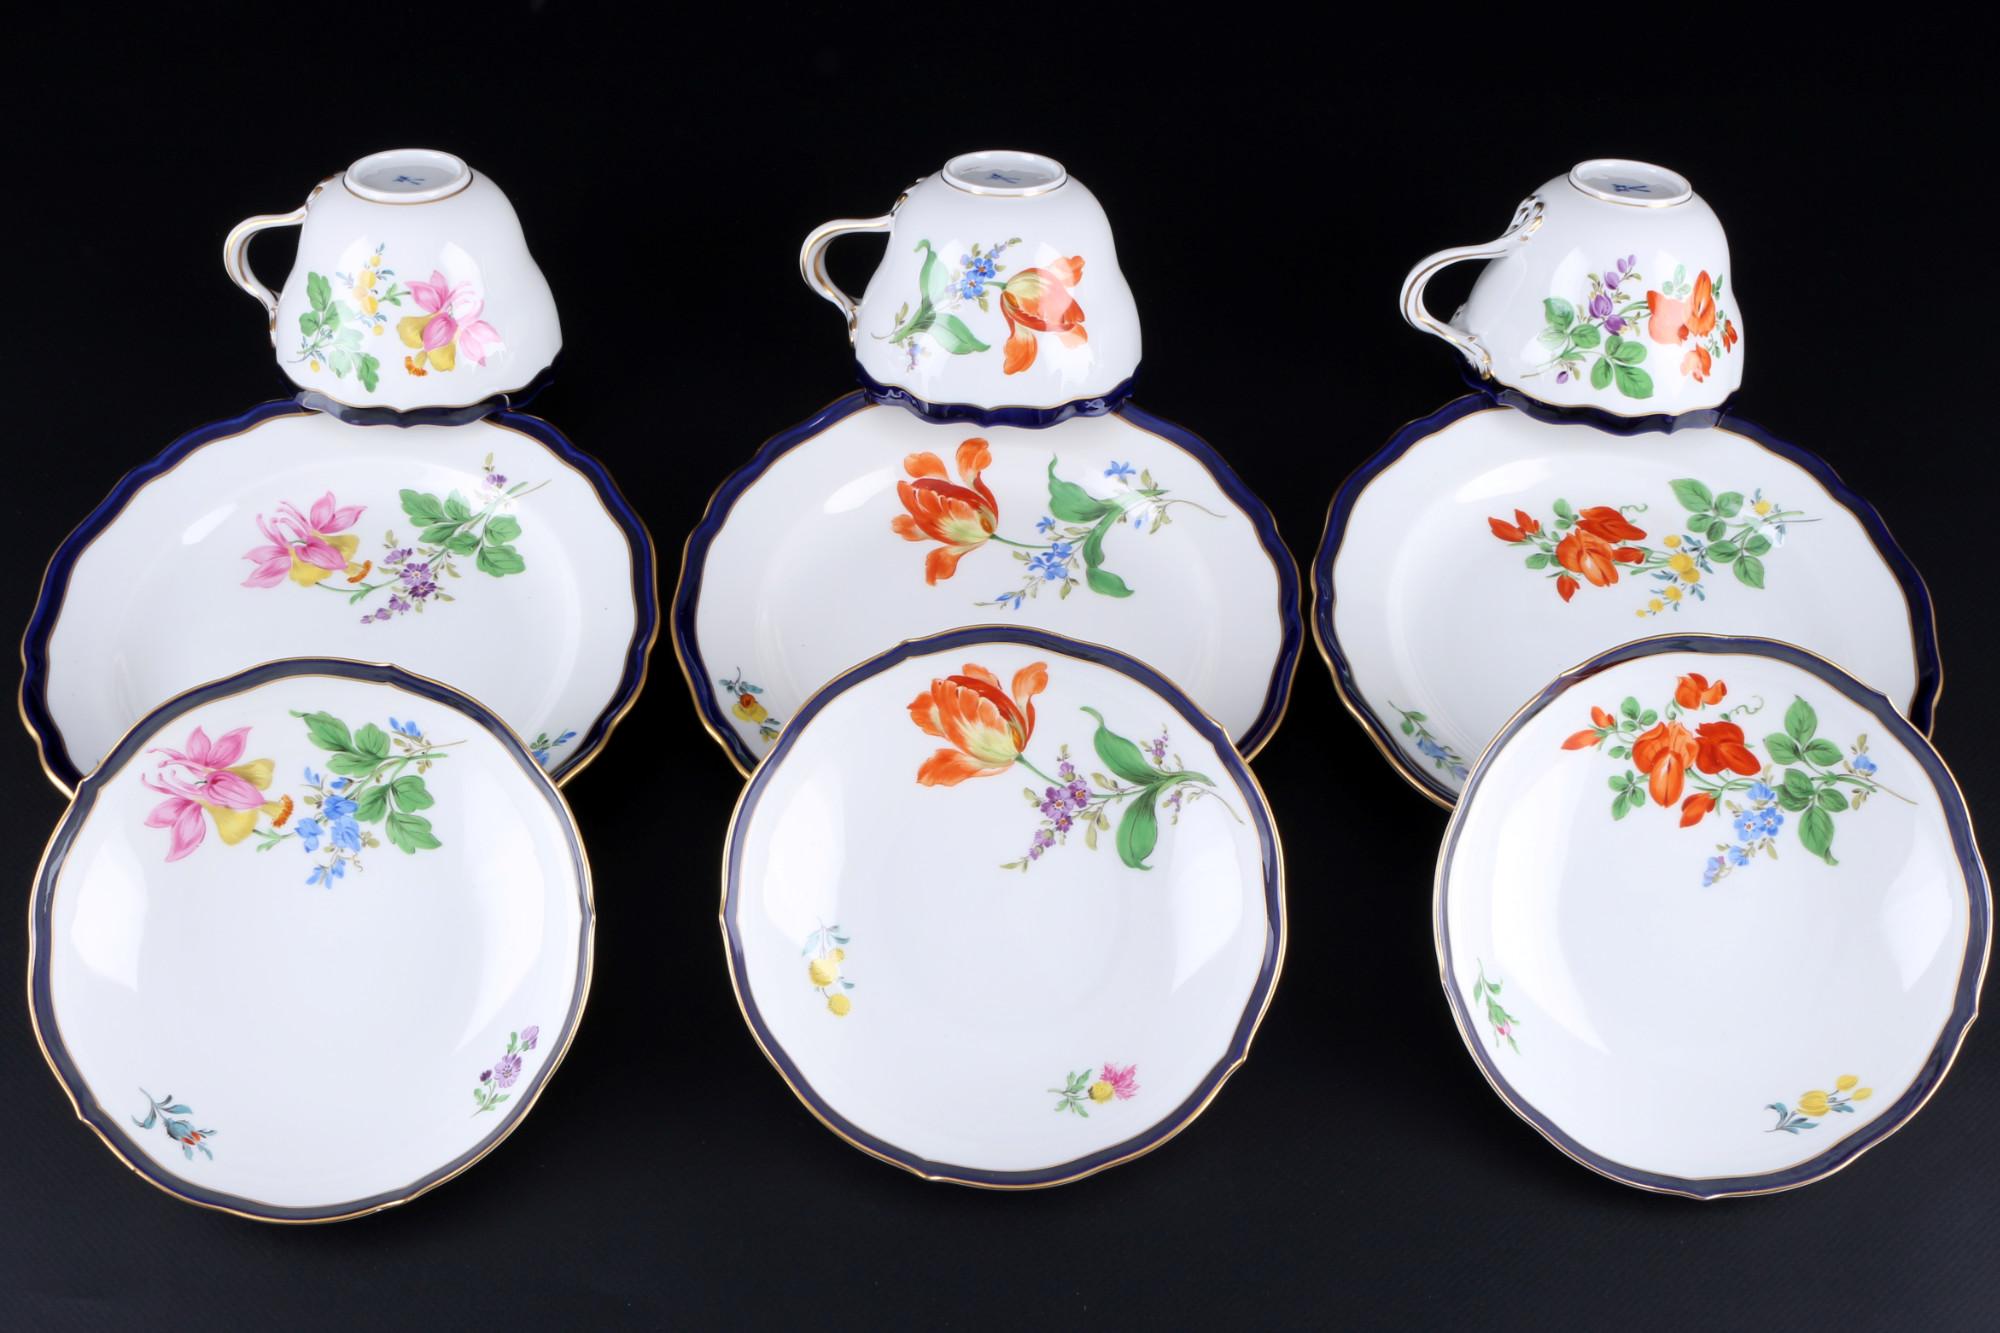 Meissen Flowers with Royal Blue Rim coffee service for 6 persons, Kaffeeservice für 6 Personen, - Image 2 of 6